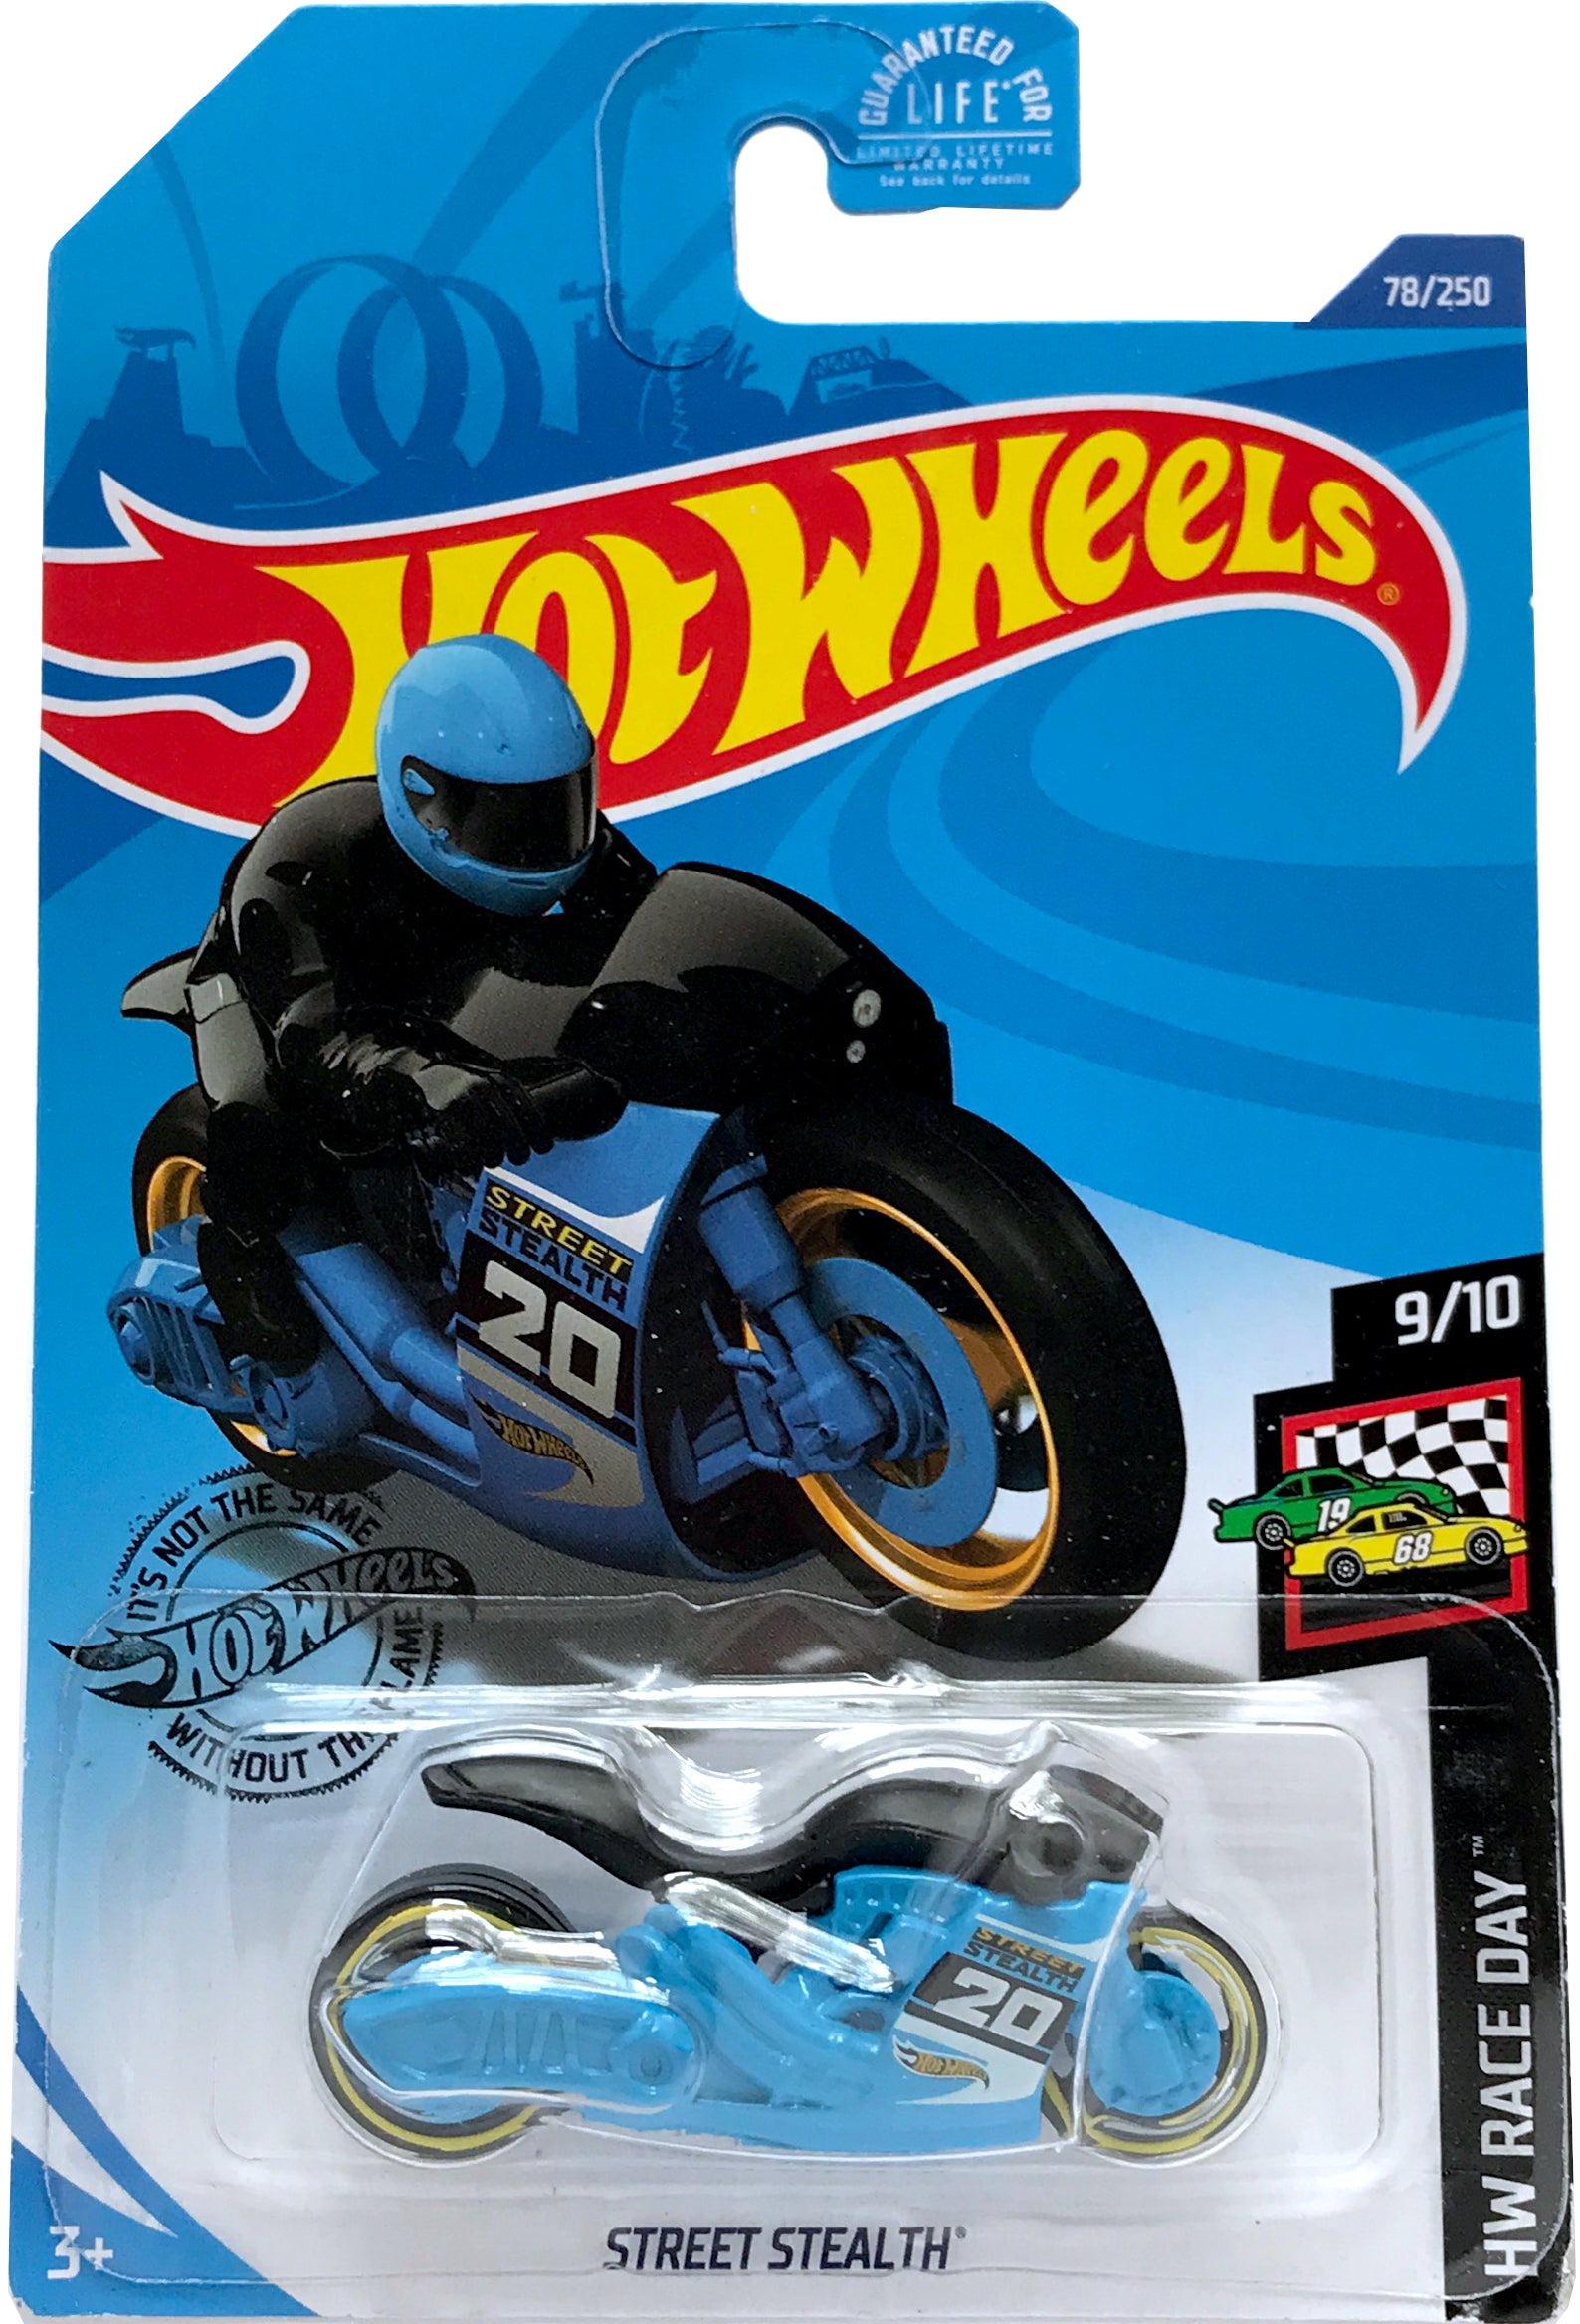 2020 Hot Wheels Mainline #078 - Street Stealth Motorcycle (Blue) GHC56